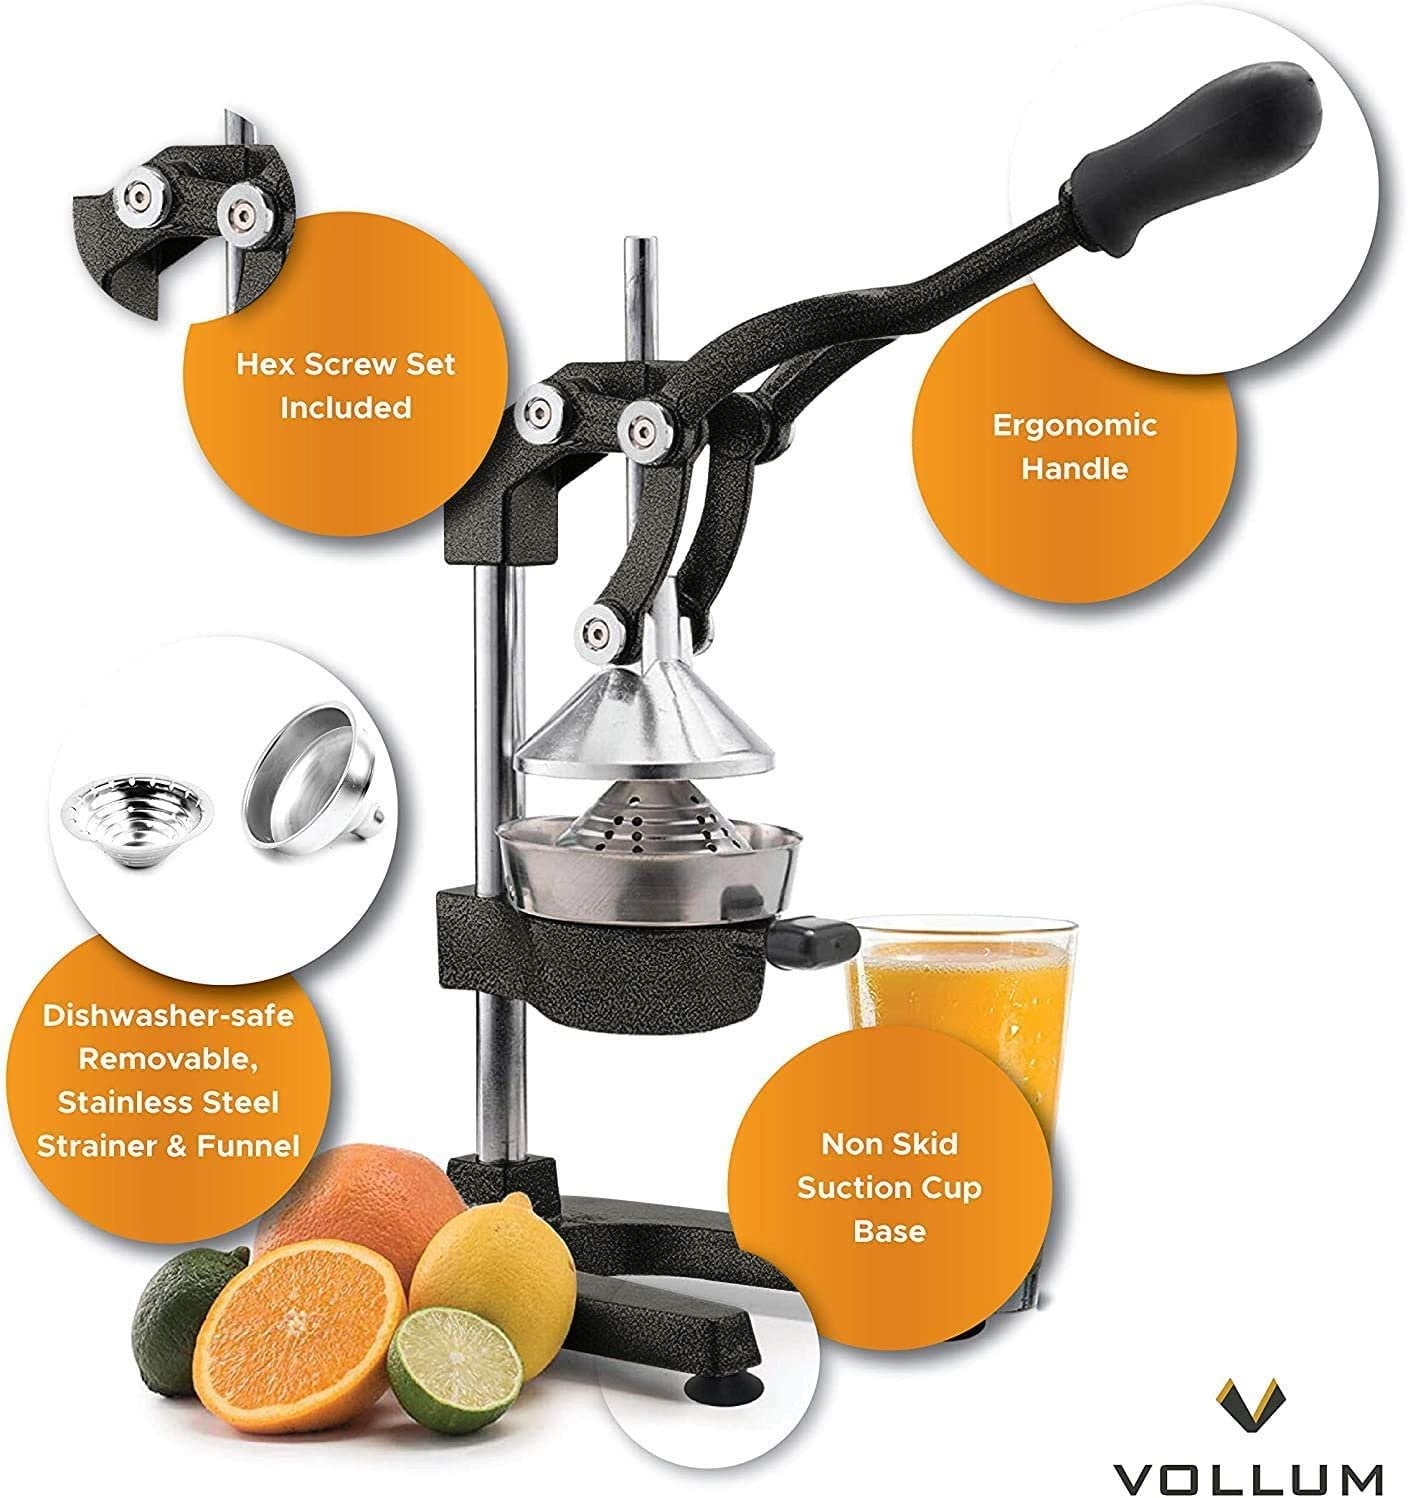 Juicers ECOCO Cute Manual Juicing Cup Orange Juicer Lemon Juice Portable  Squeezer Pressure Fruit Juicer For Home Kitchen Accessories P230407 From  Wangcai09, $10.25